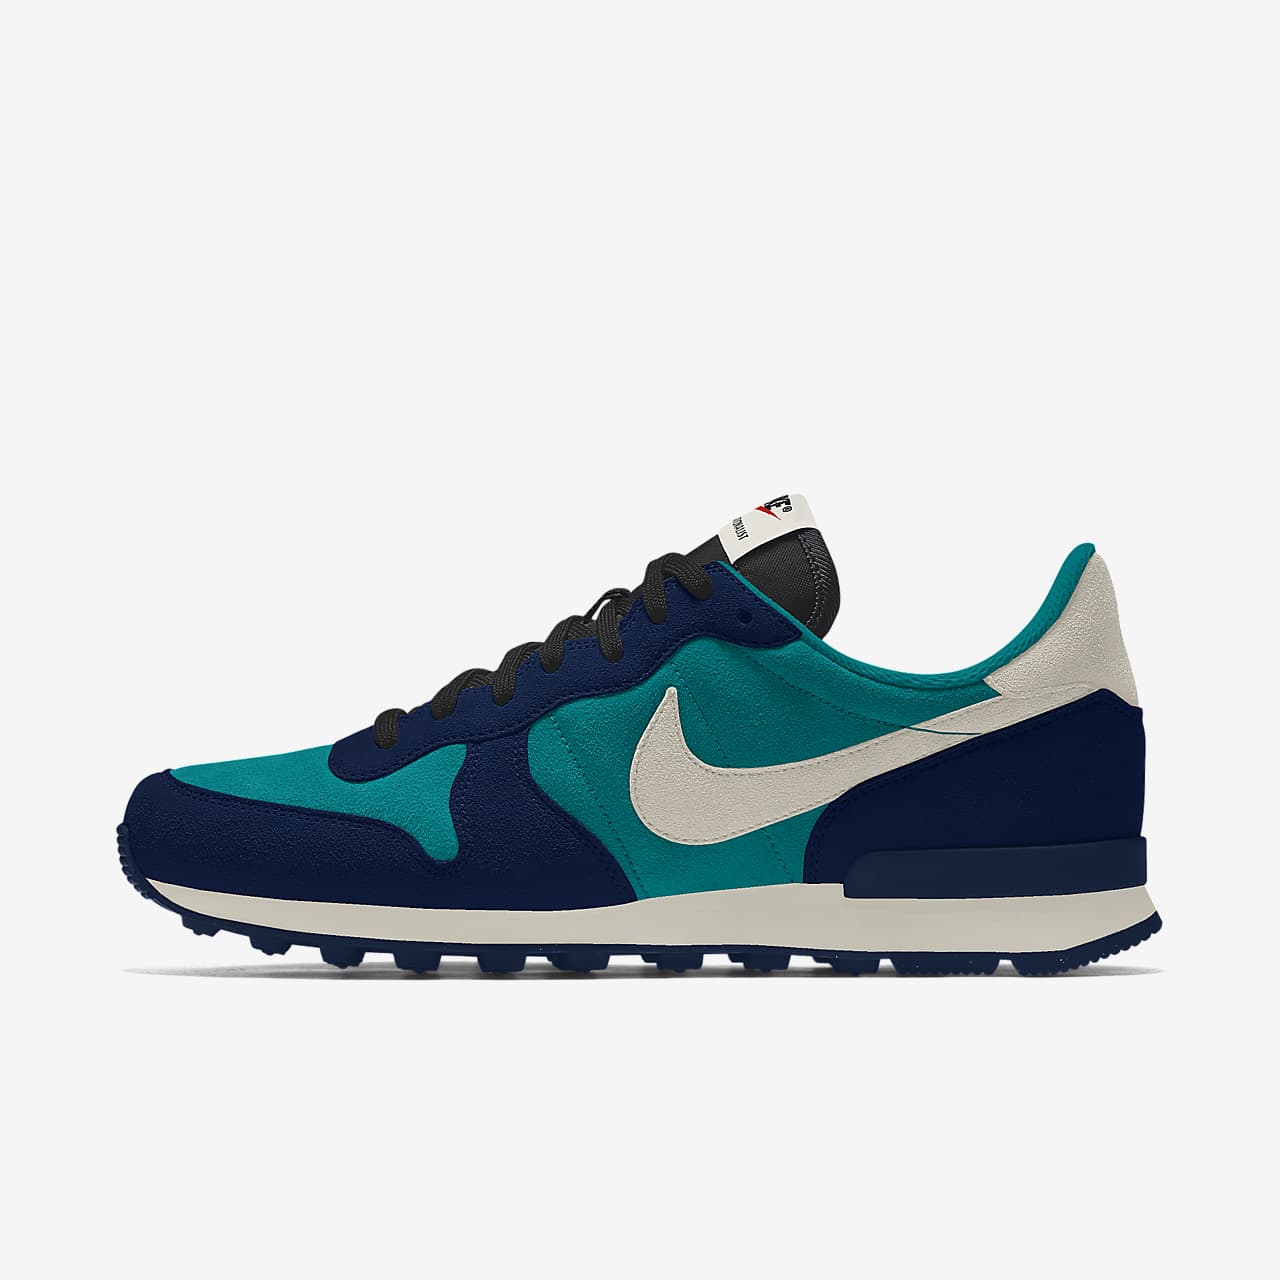 Chaussure personnalisable Nike Internationalist By You pour Femme ...